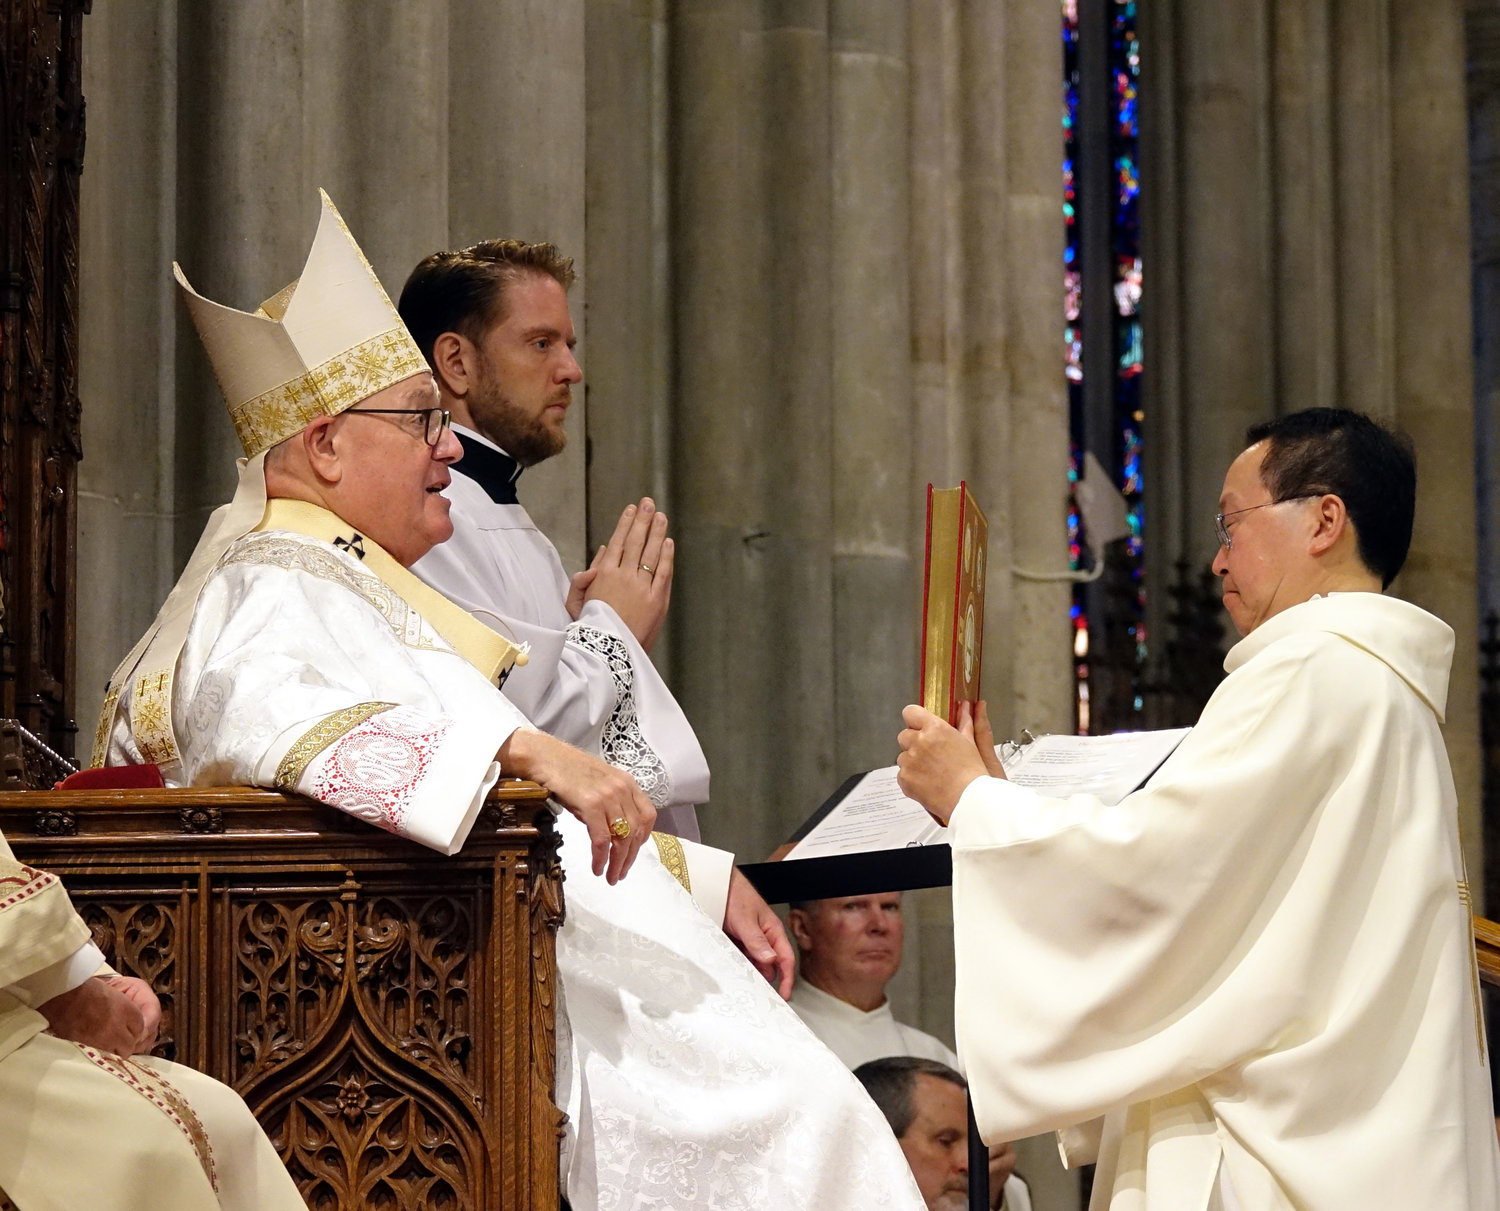 Cardinal Dolan hands Book of the Gospels to Deacon John Hum during the Mass of Ordination in St. Patrick's Cathedral June 19.